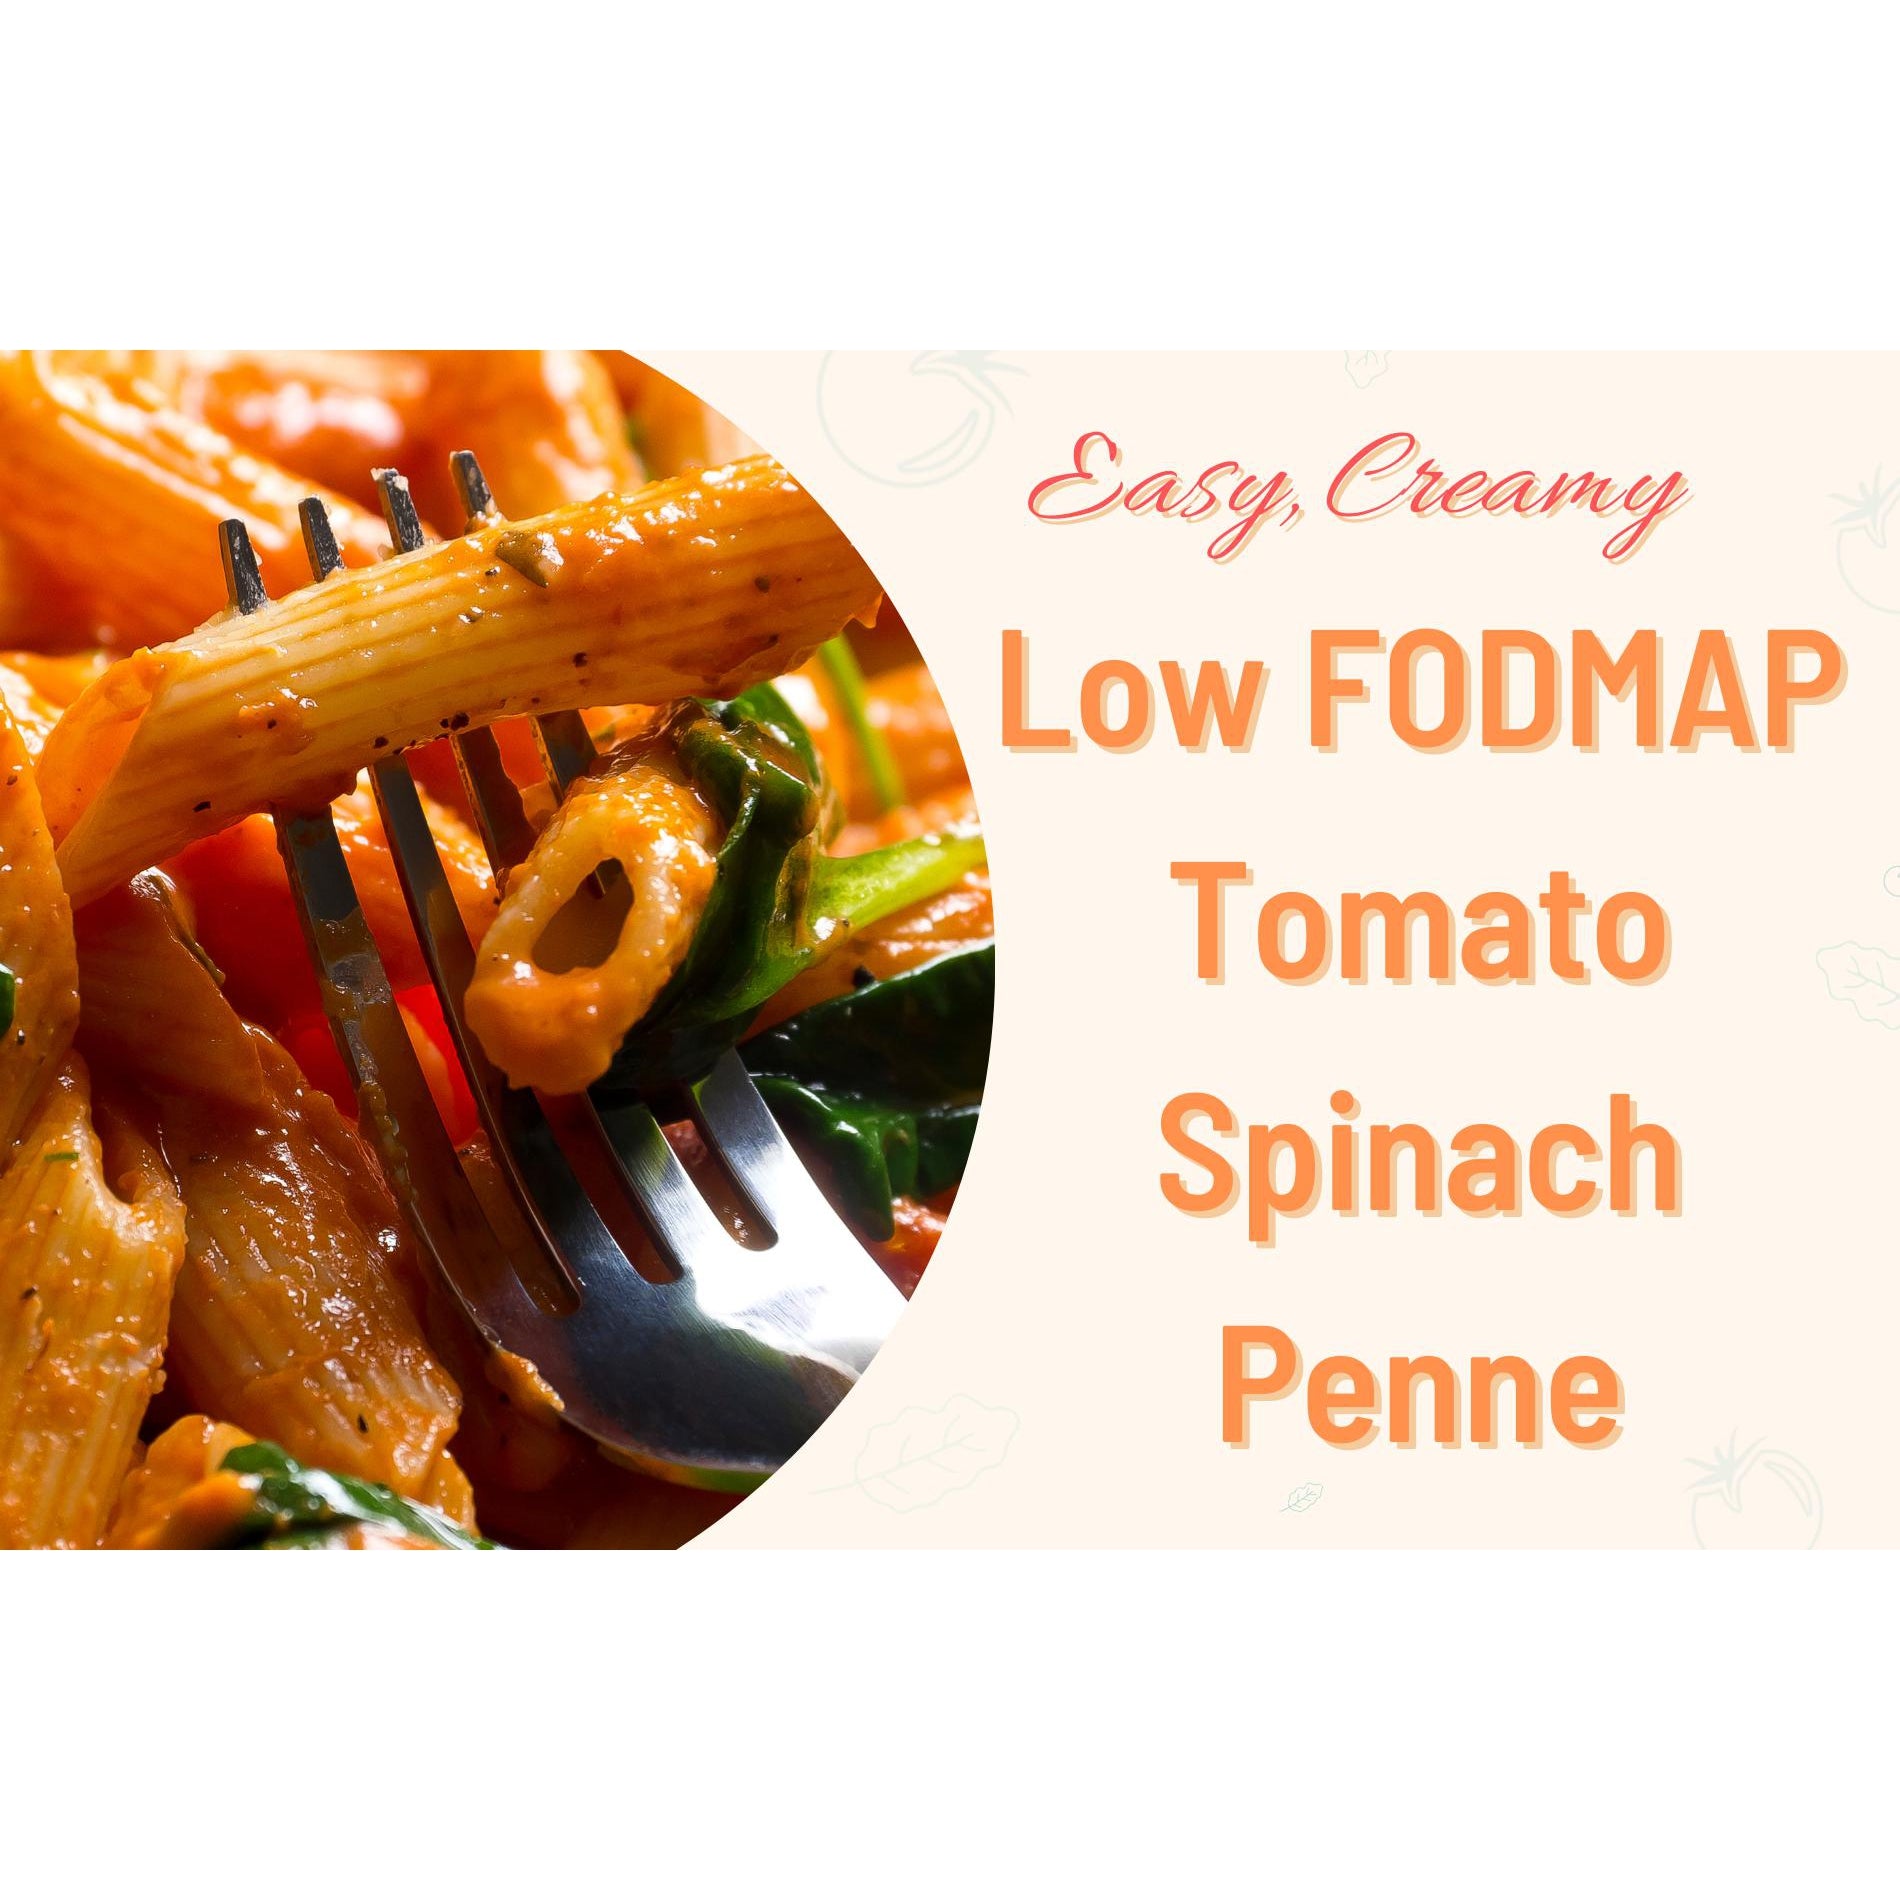 Easy Creamy Low FODMAP Tomato & Spinach Pasta